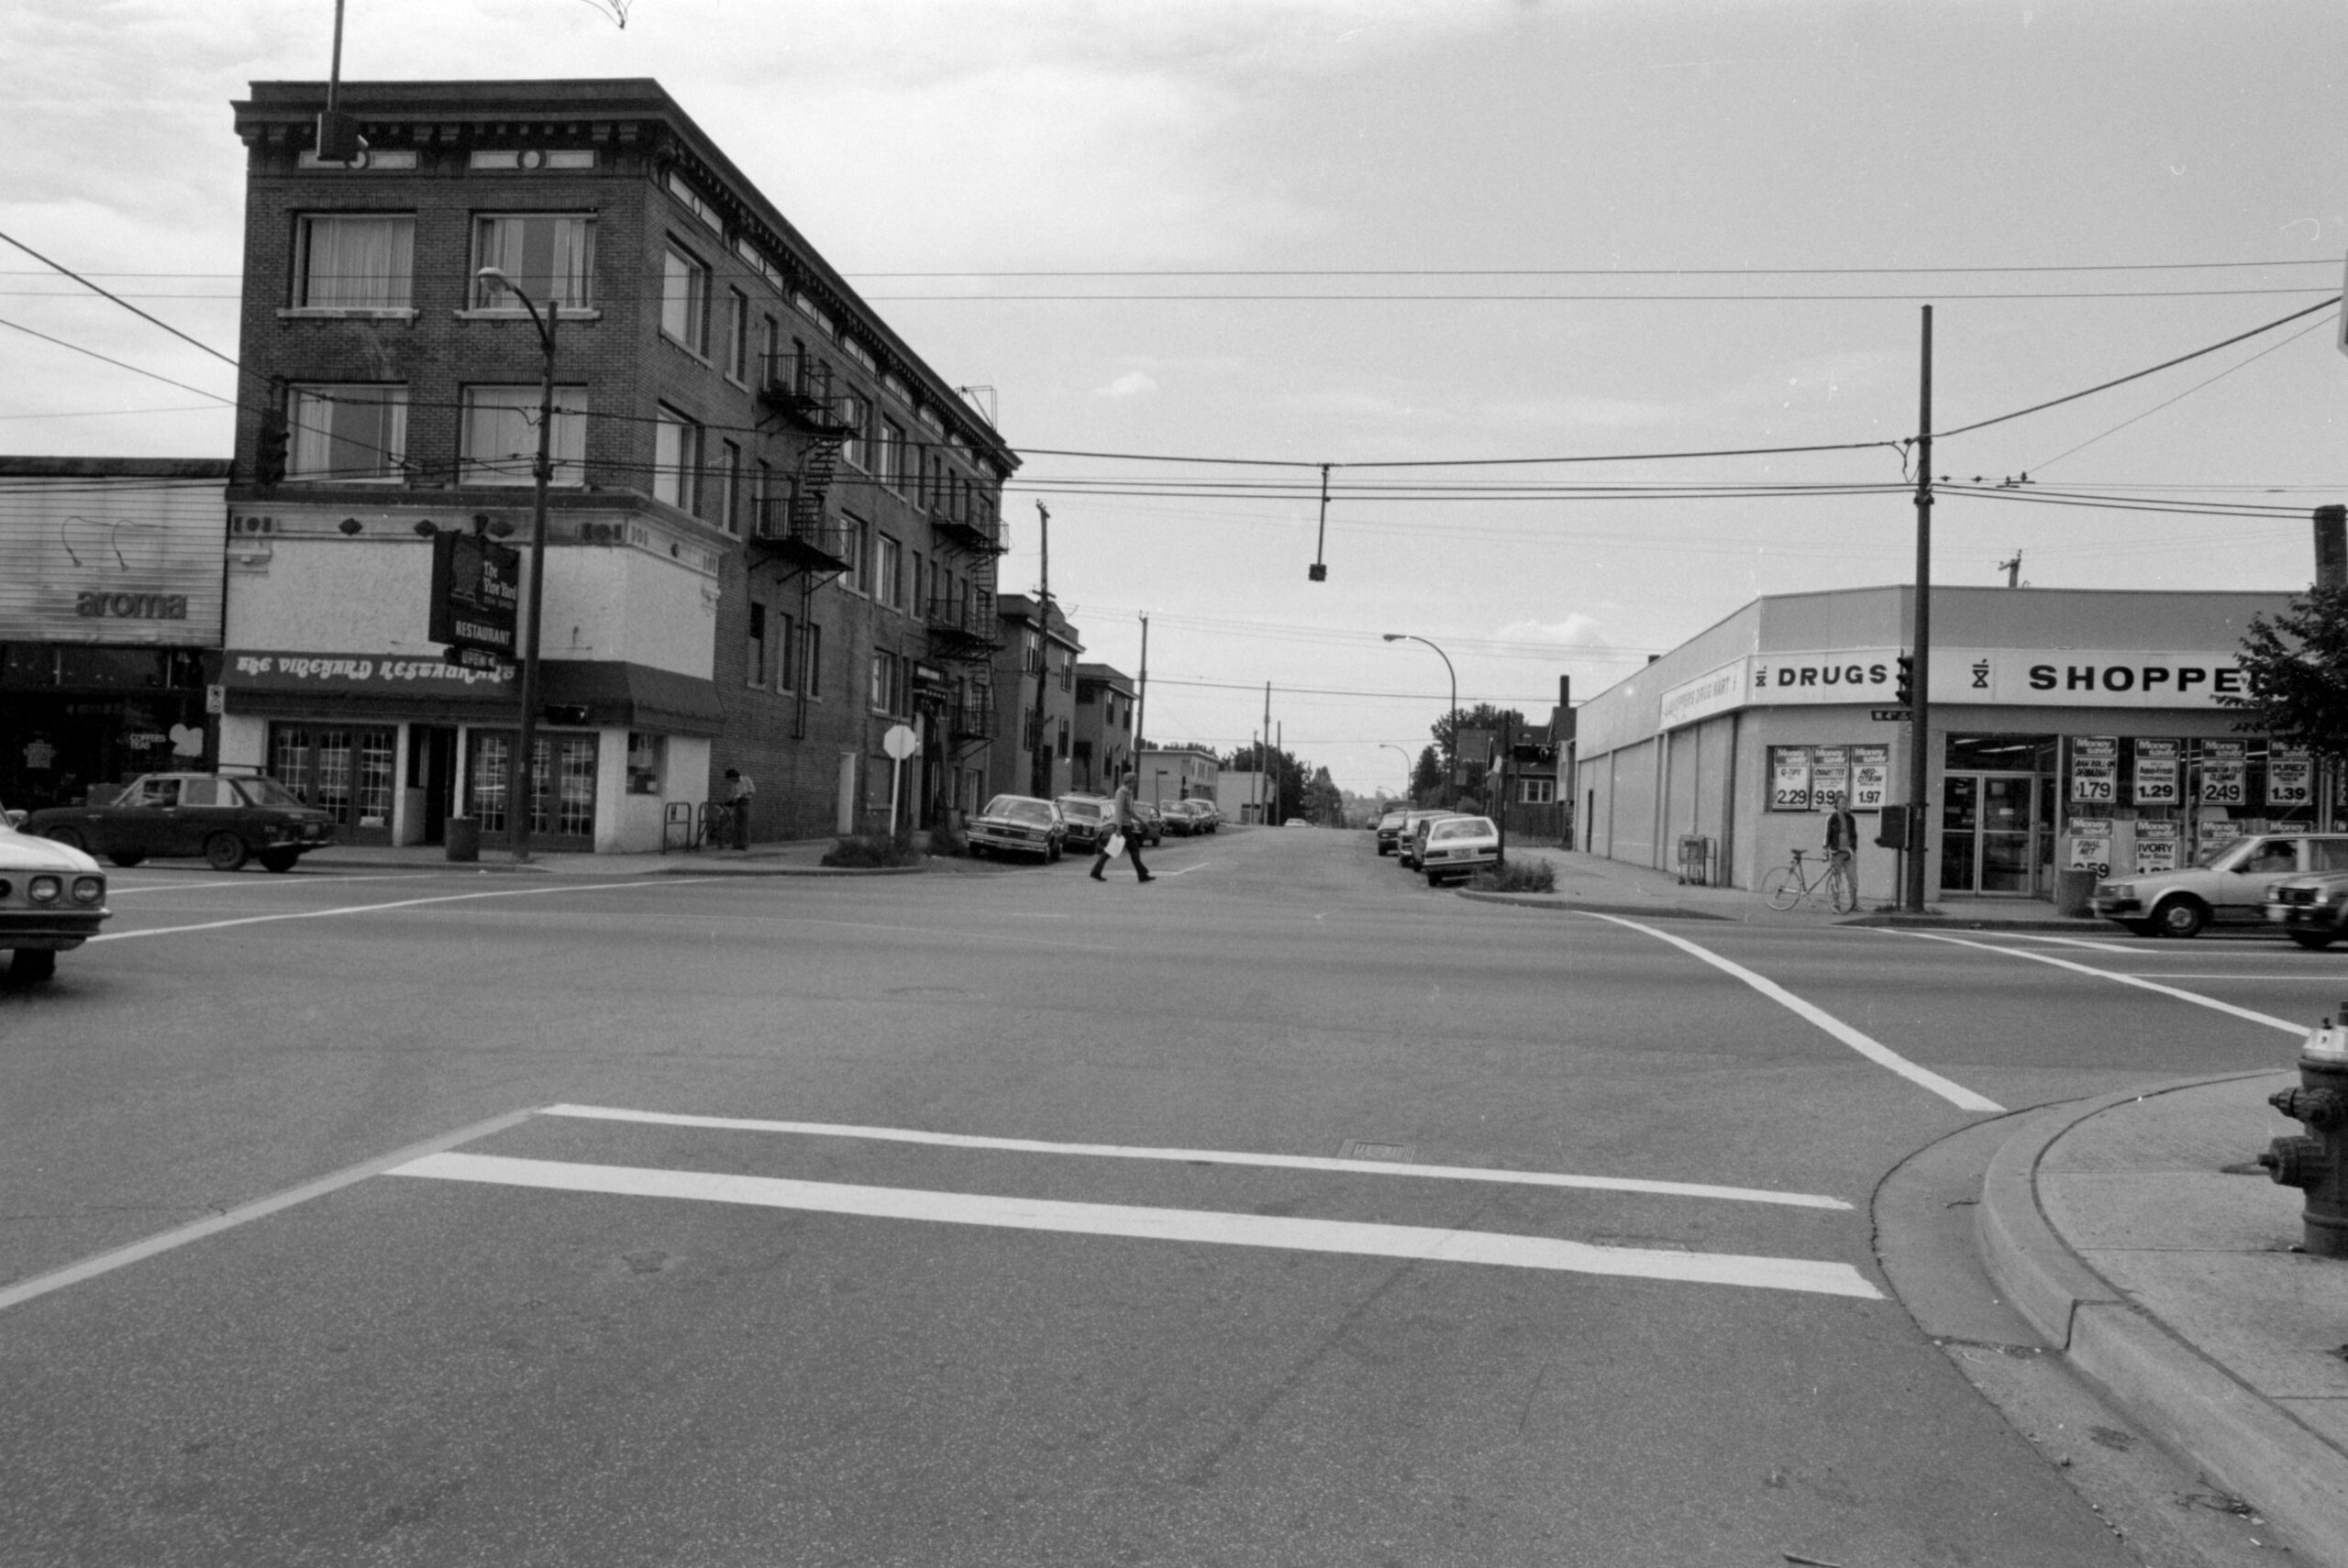 Vine Street and 4th Avenue intersection. Reference code: COV-S505-1-: 2019-103.0559